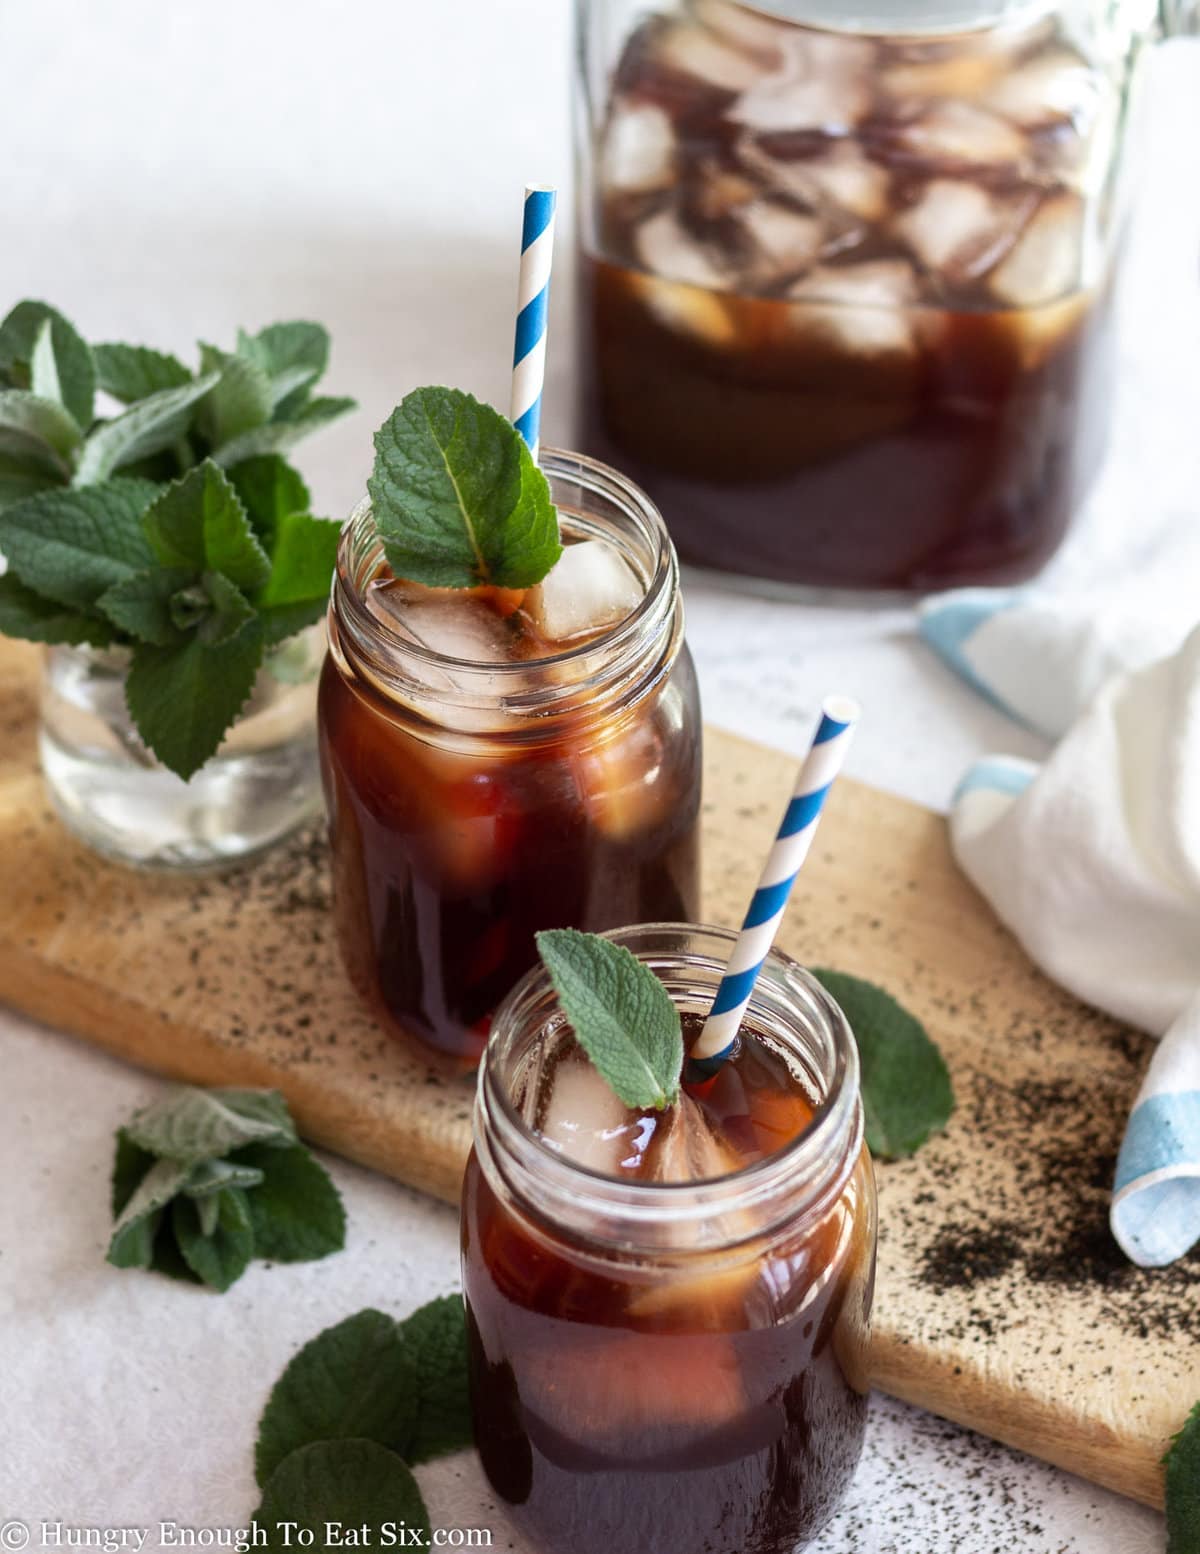 Pitcher and mason jars of dark iced tea with ice cubes and mint leaves.